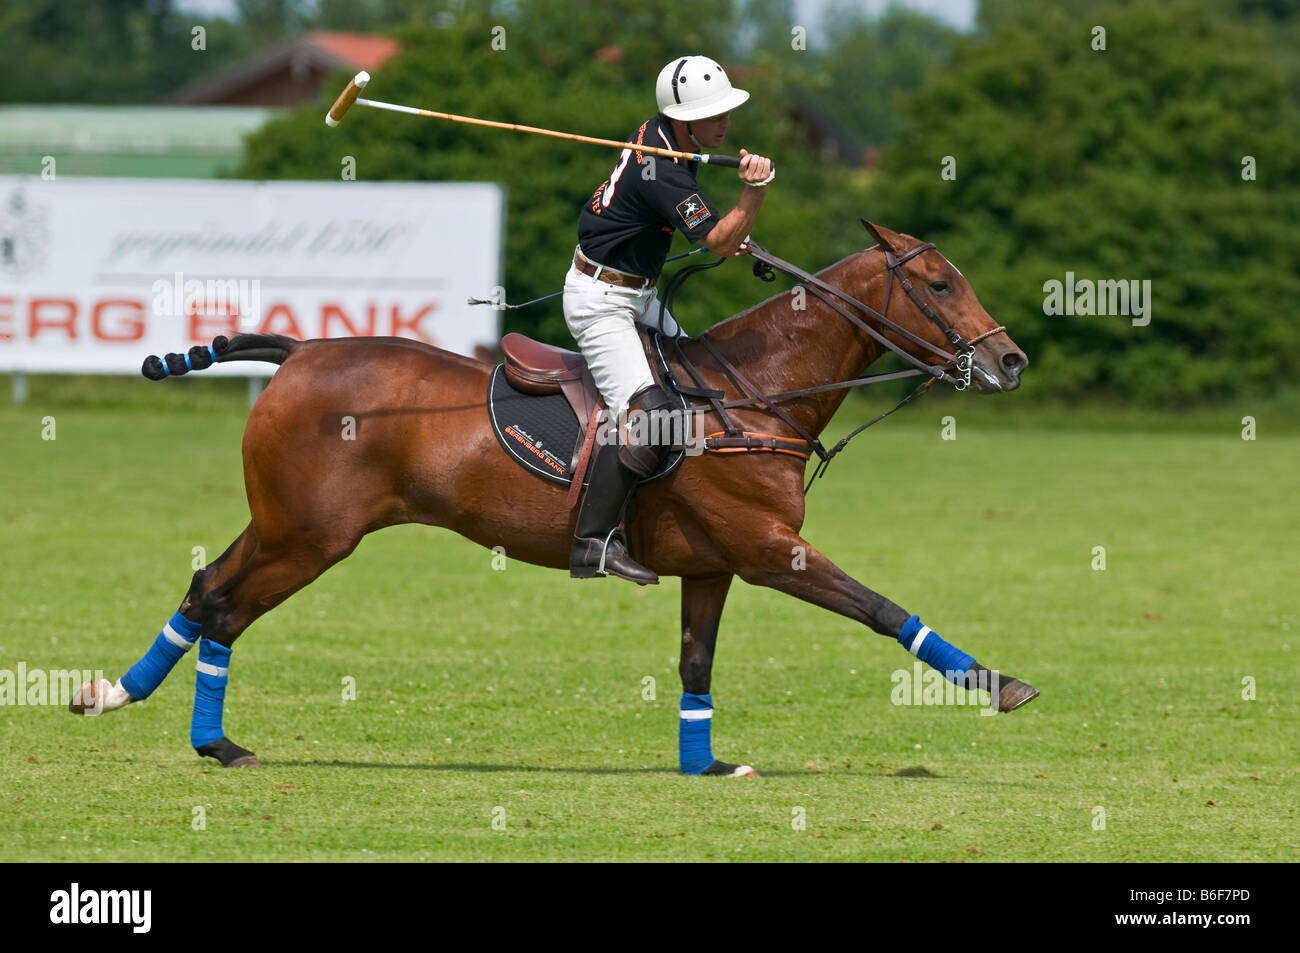 Polo, polo player chasing after a ball, polo competition, Berenberg High Goal Trophy 2008, Thann, Holzkirchen, Upper Bavaria, B Stock Photo